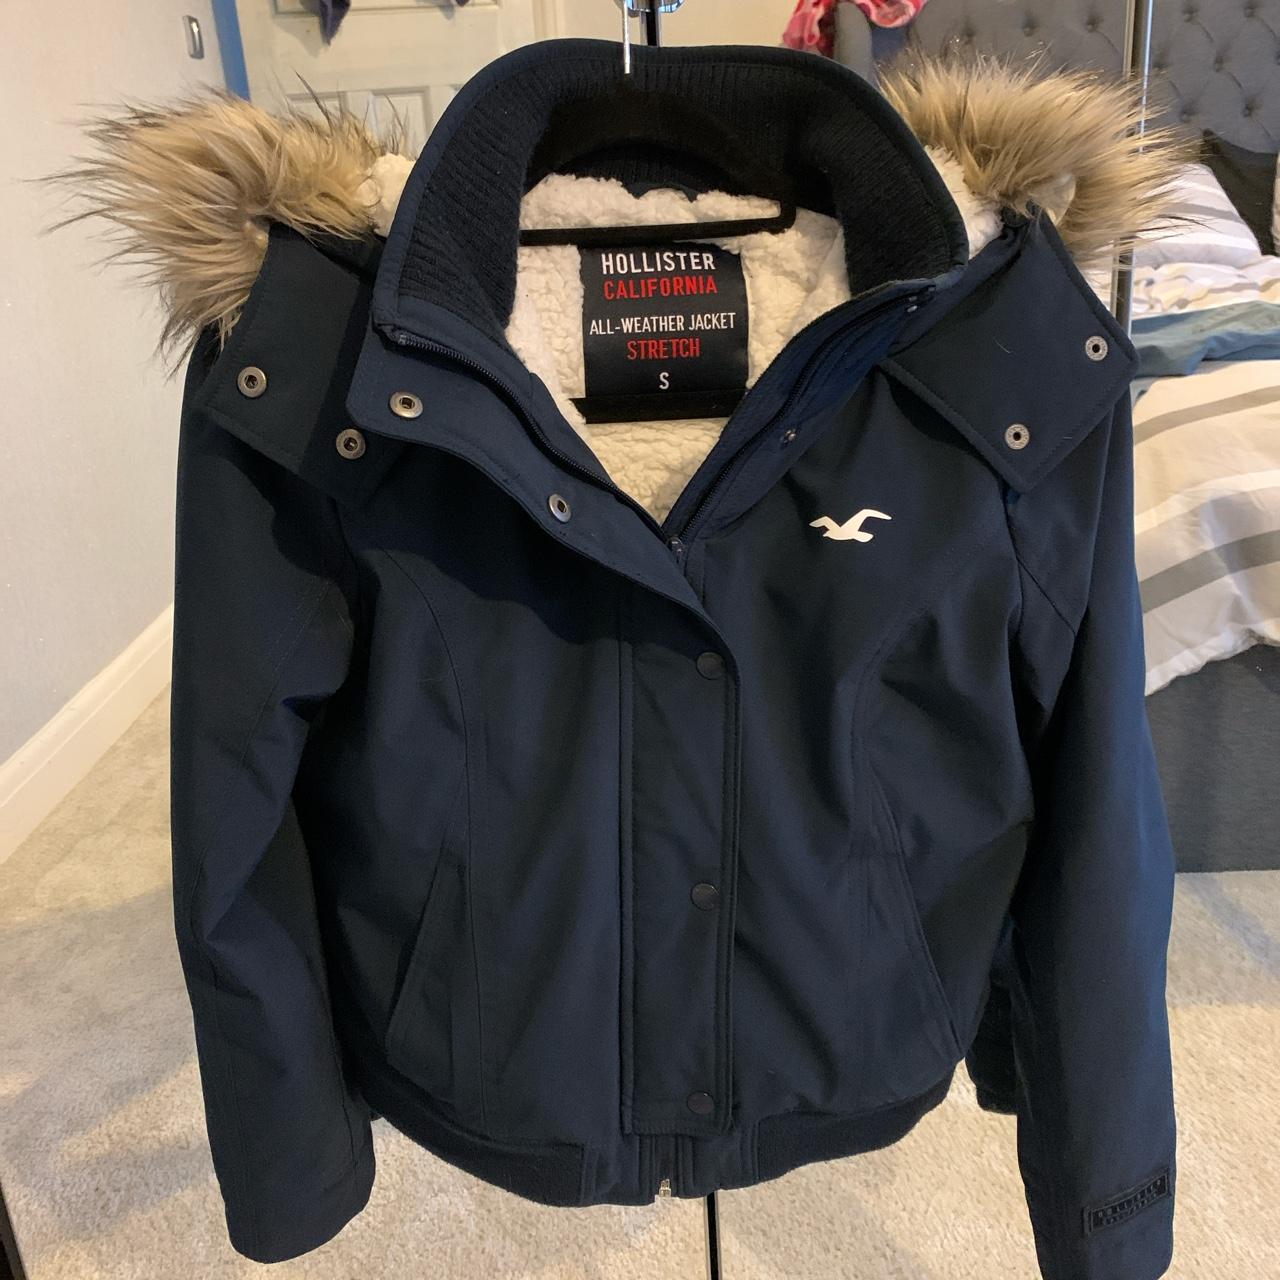 Hollister California All Weather Sherpa lined jacket